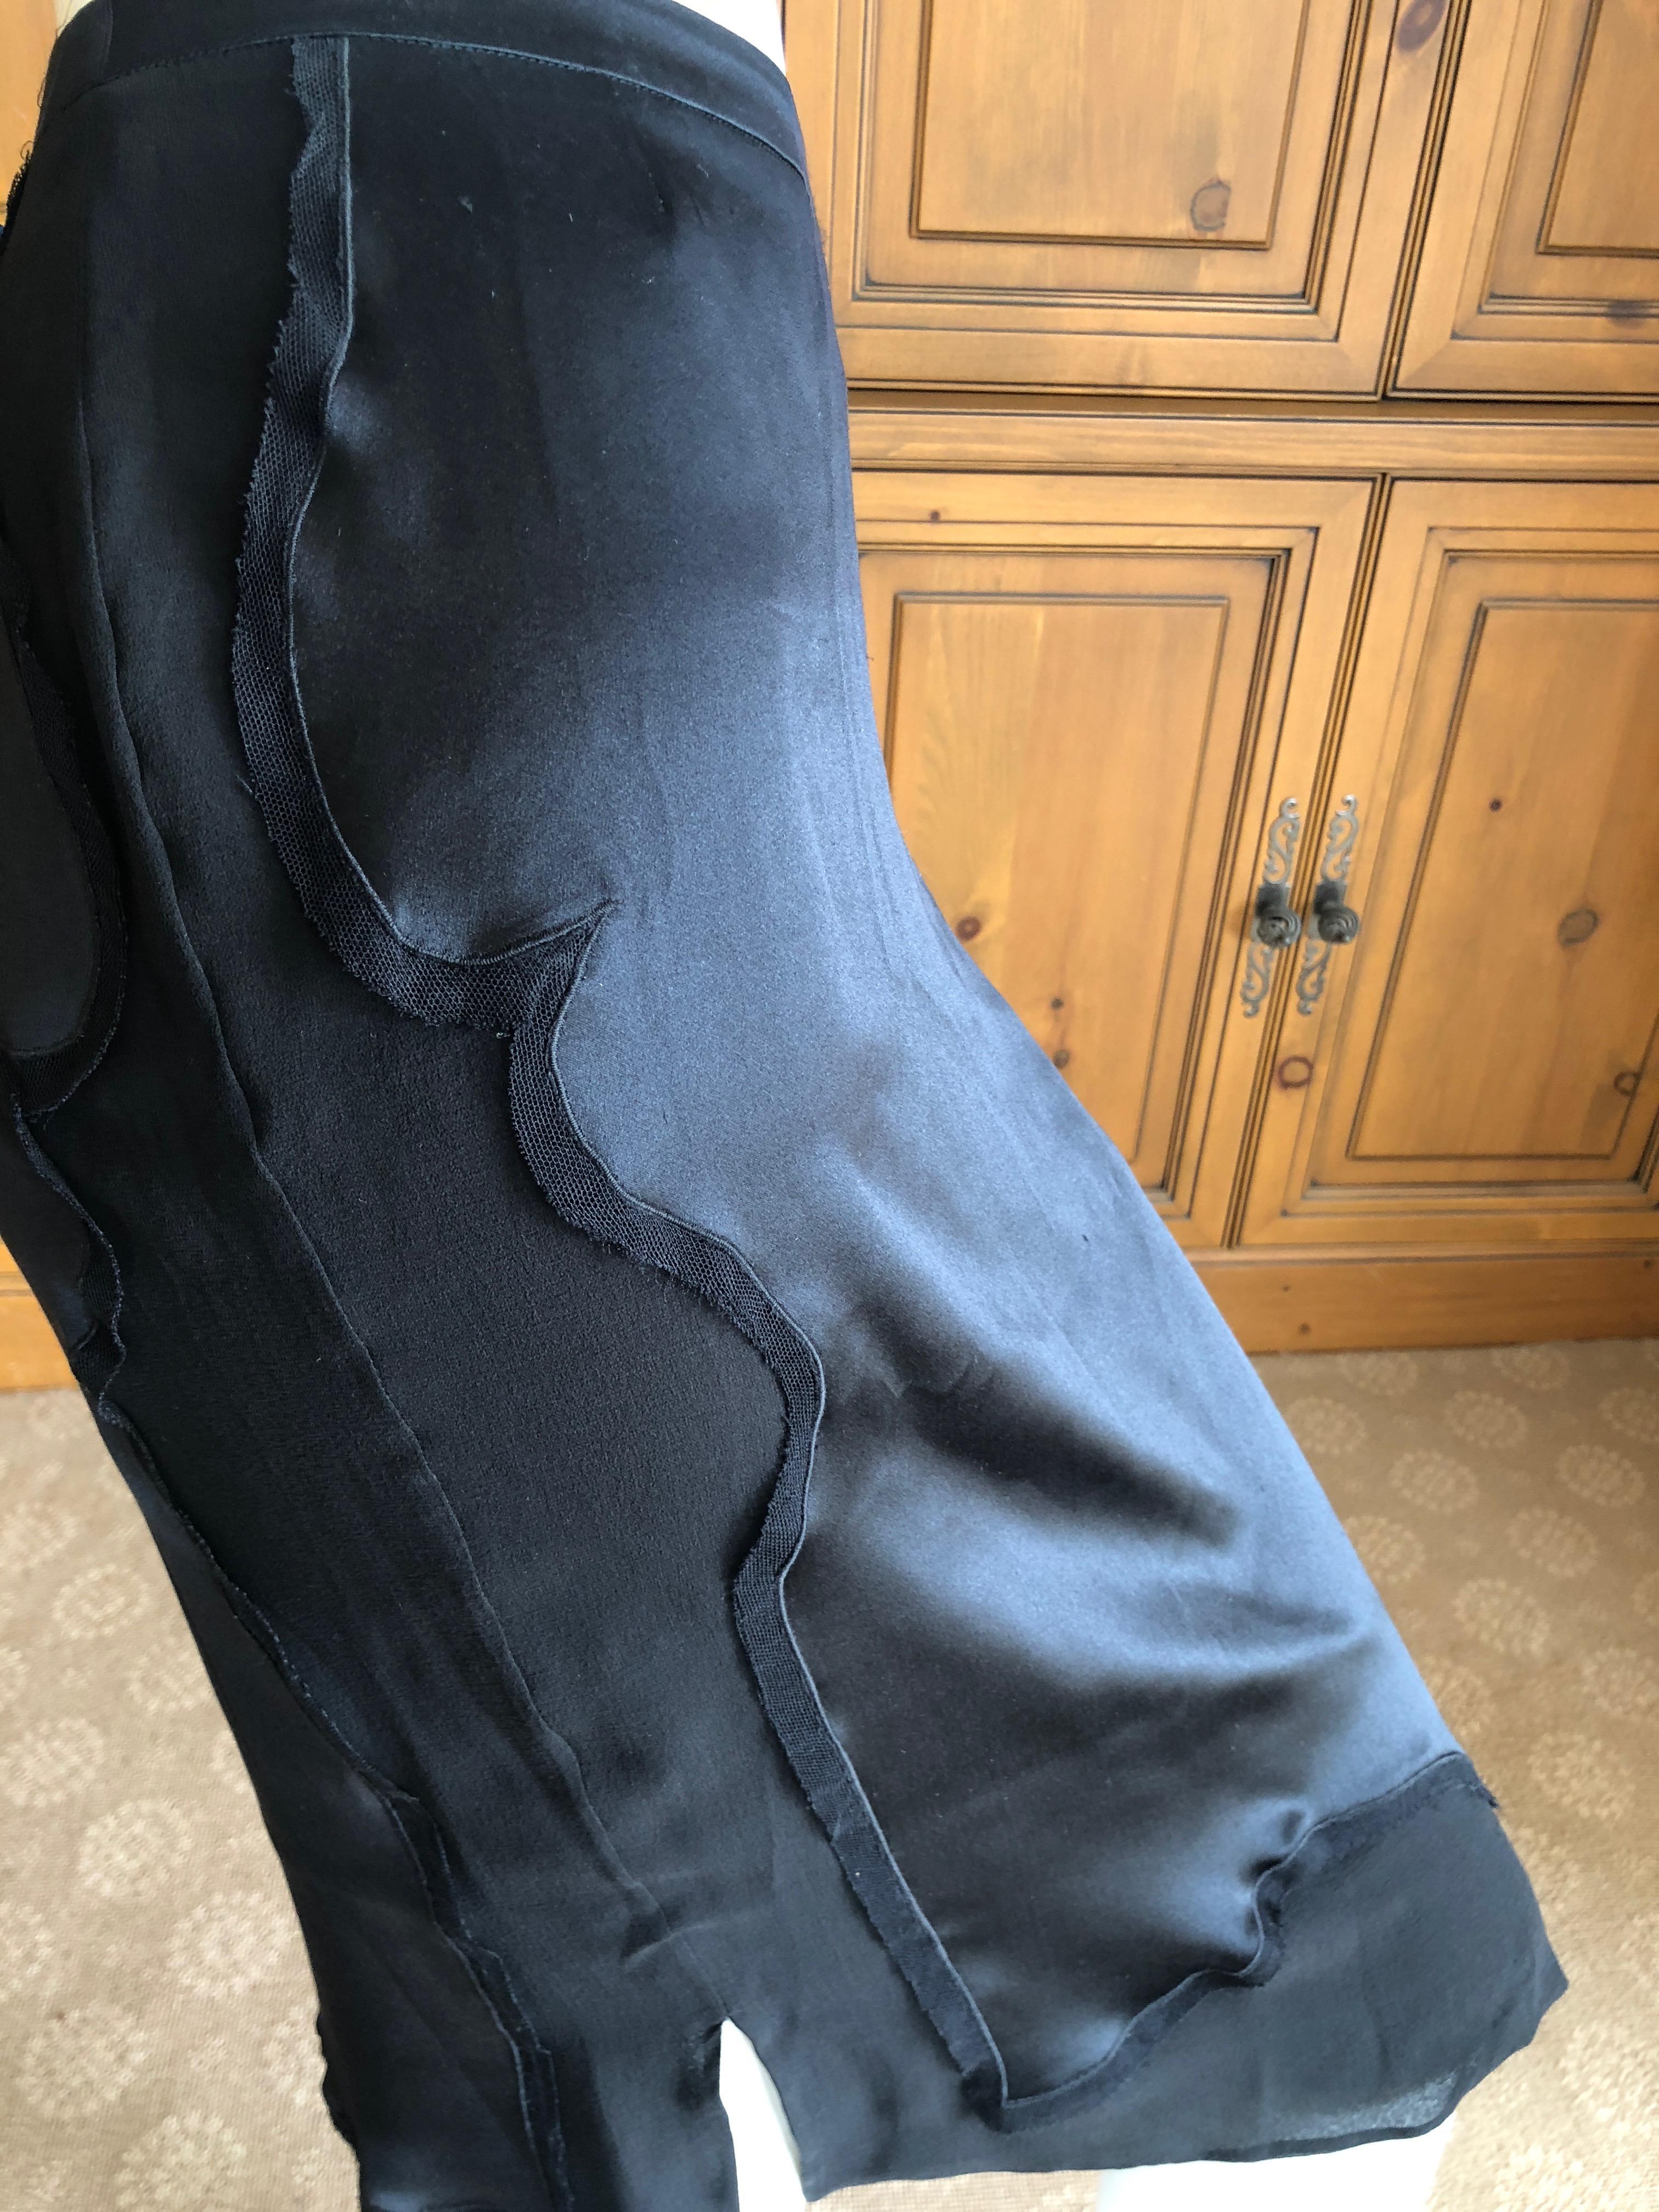 Yves Saint Laurent by Tom Ford 2004 Black Silk Skirt Size 40 In Excellent Condition For Sale In Cloverdale, CA